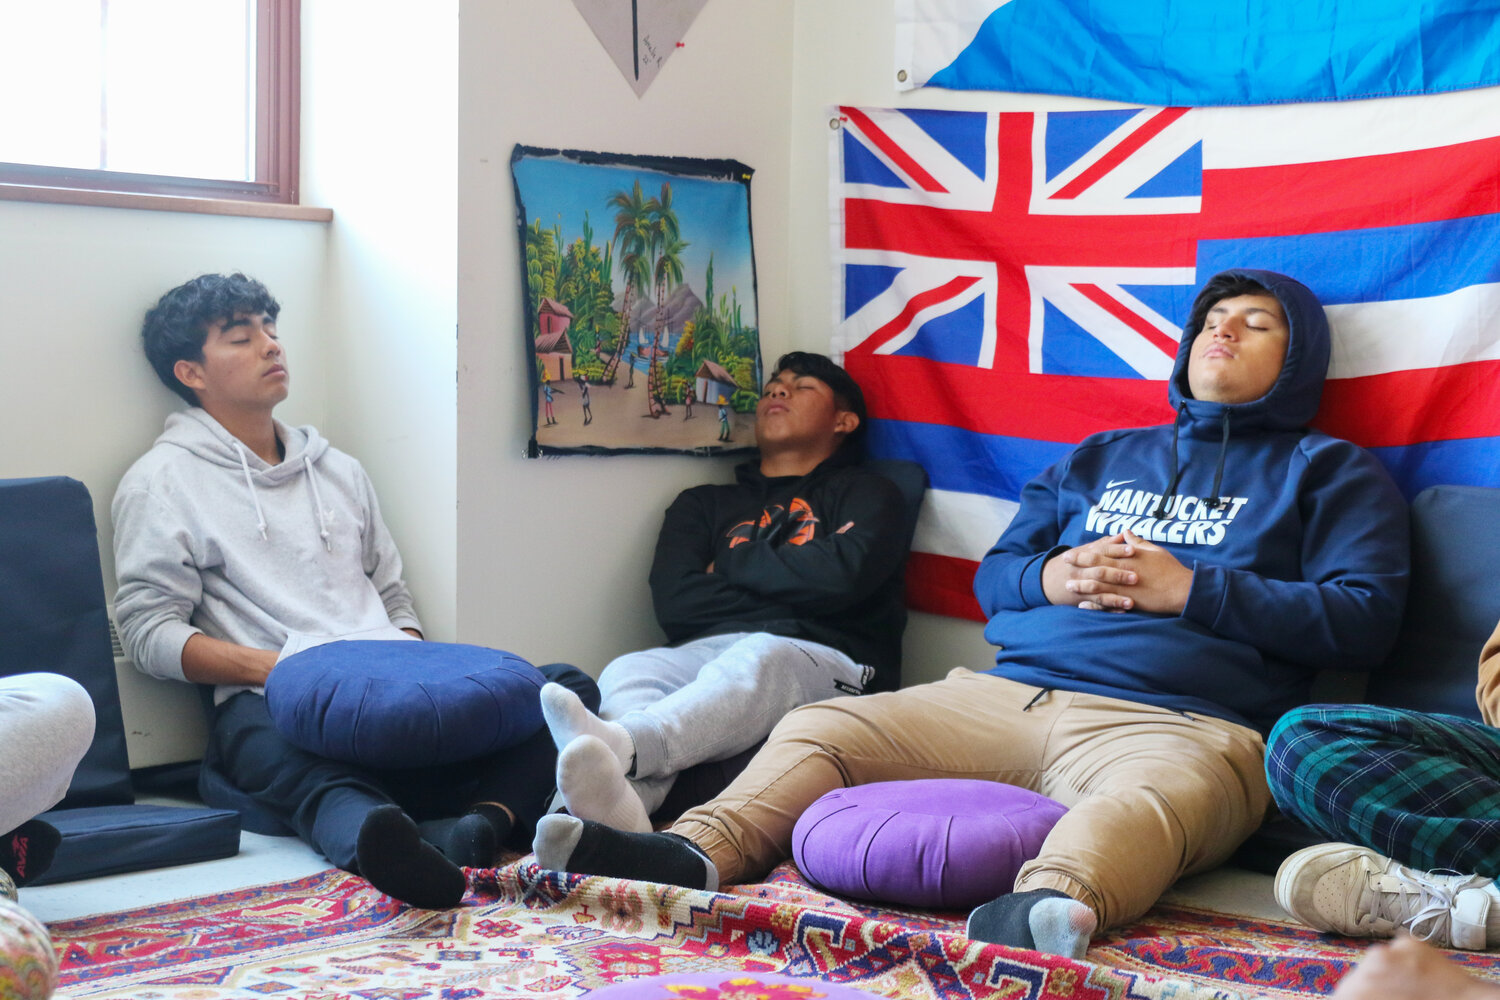 From left, Jose Diaz, Elvis Alonzo and Anderson Tejada during Andrew Viselli’s meditation class at Nantucket High School last month.